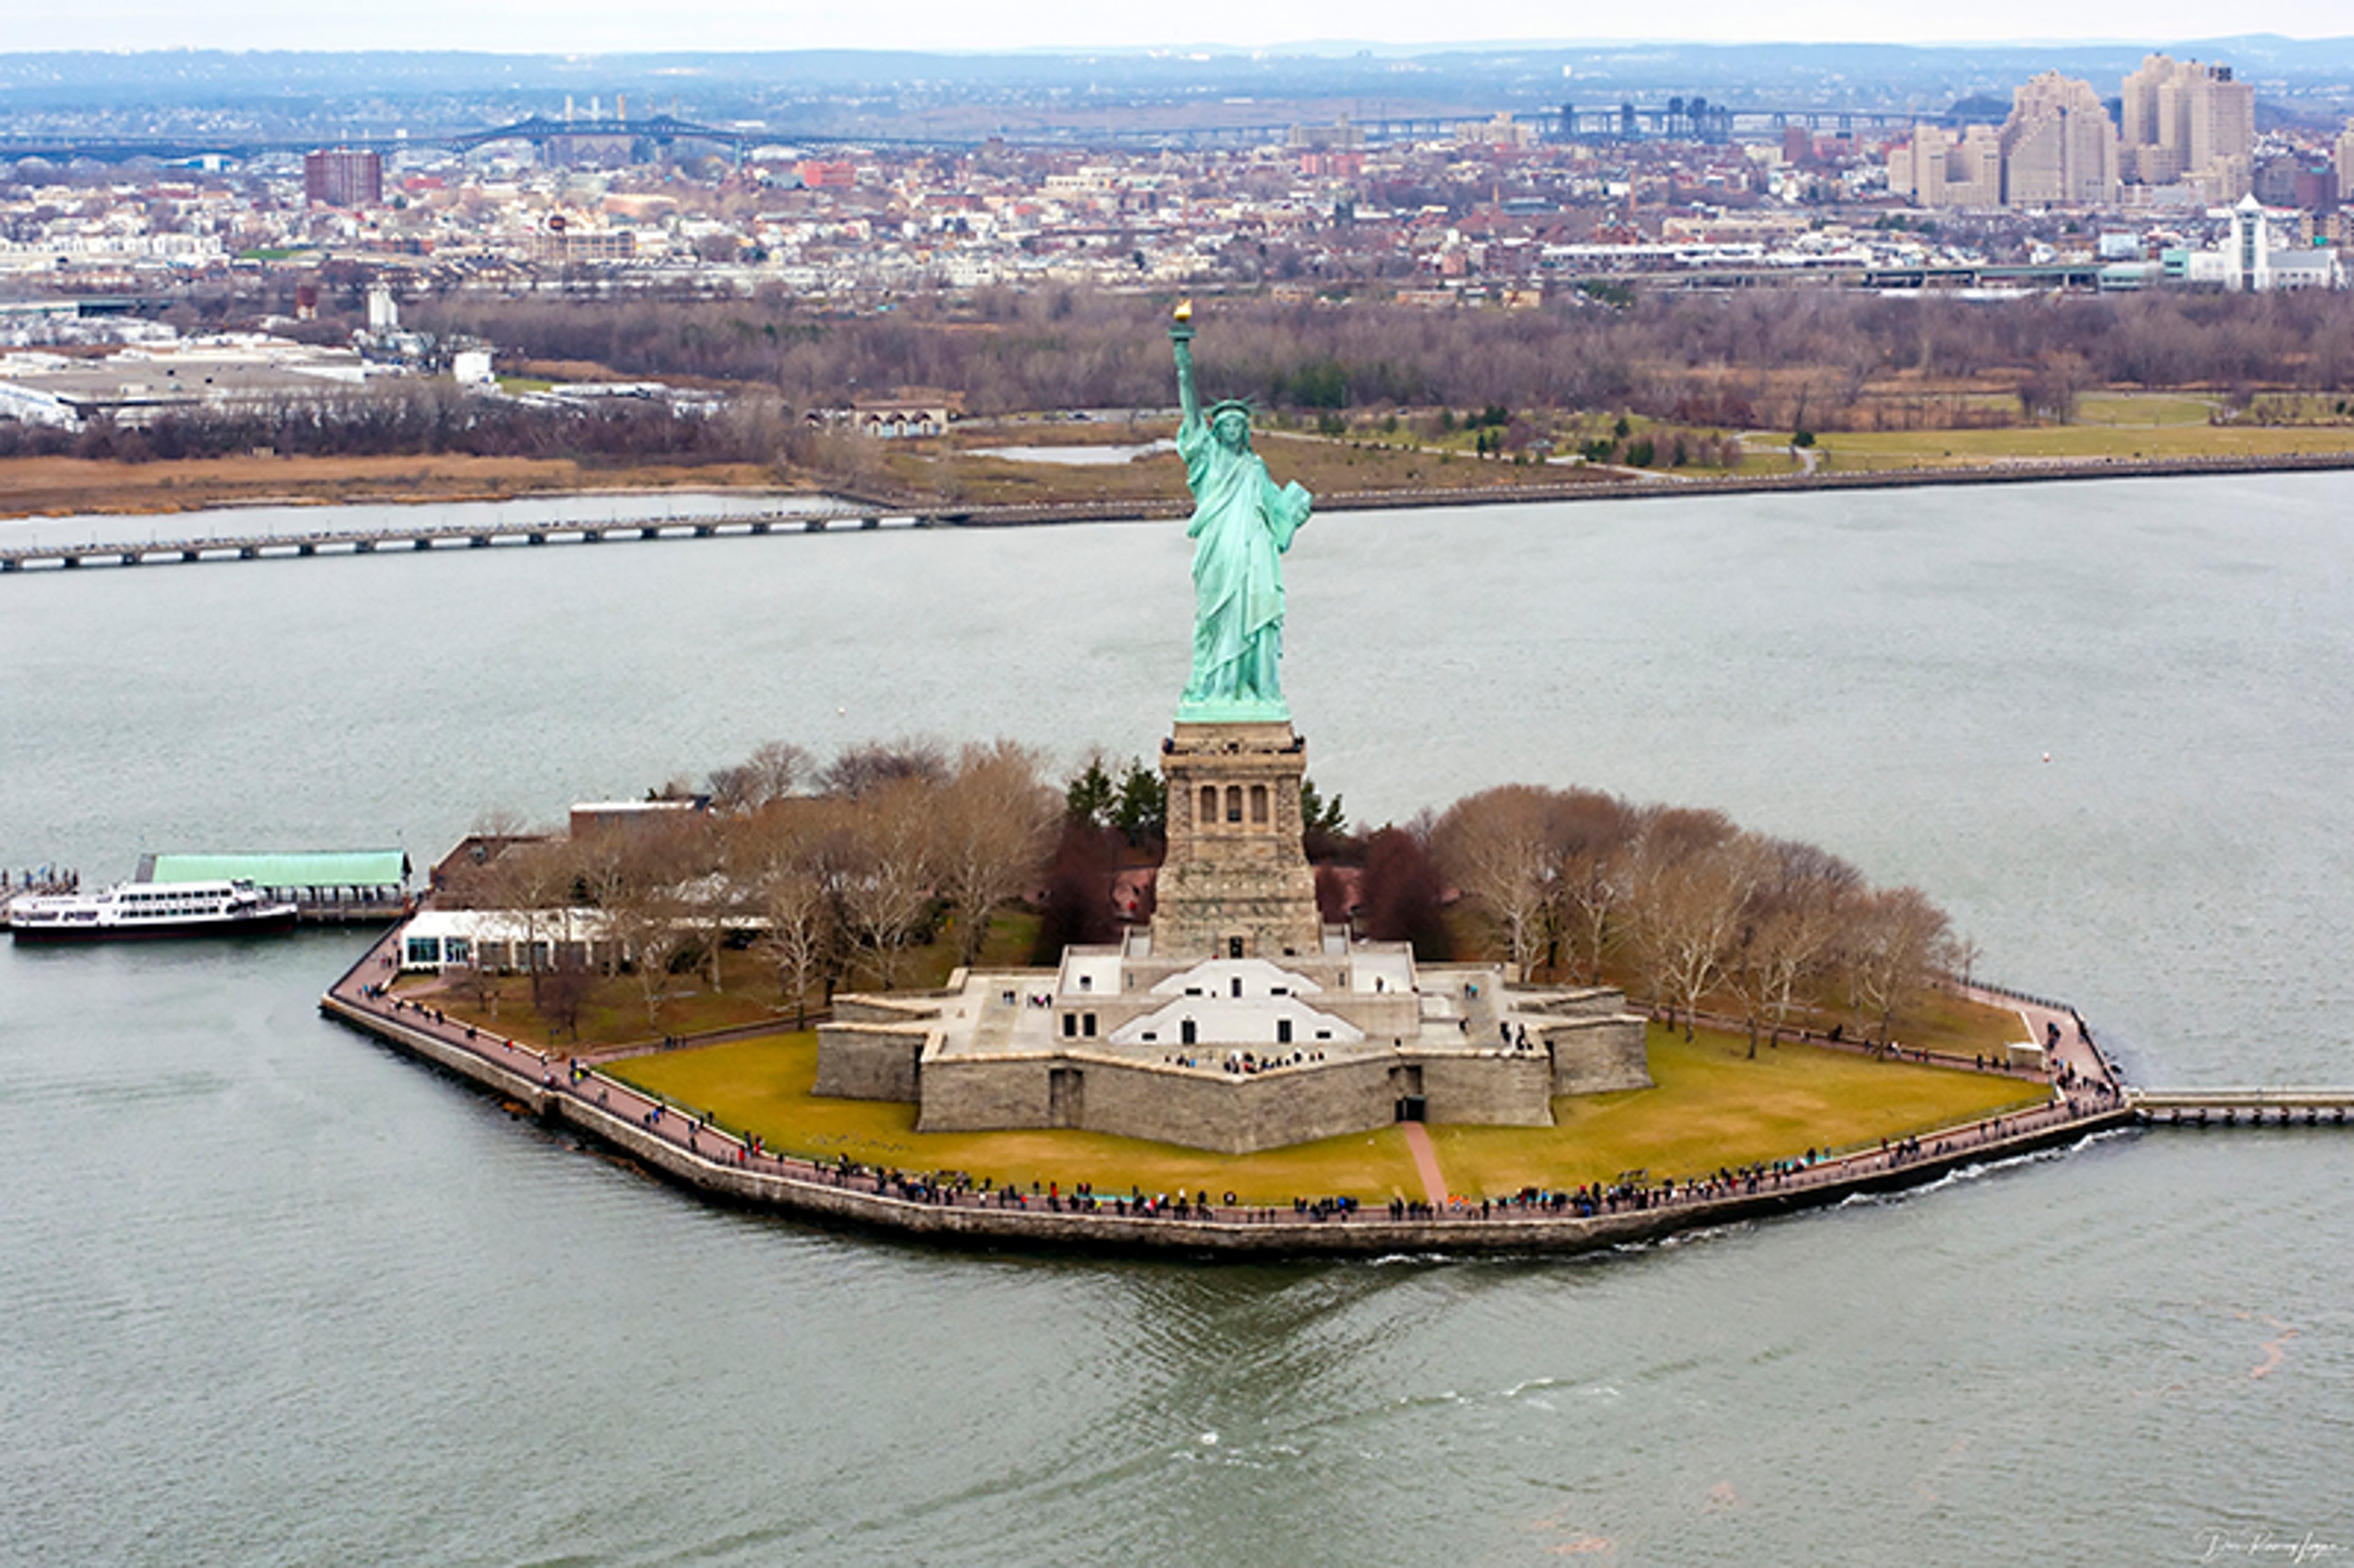 Ticket Purchases for the Statue of Liberty: A Visitors Guide